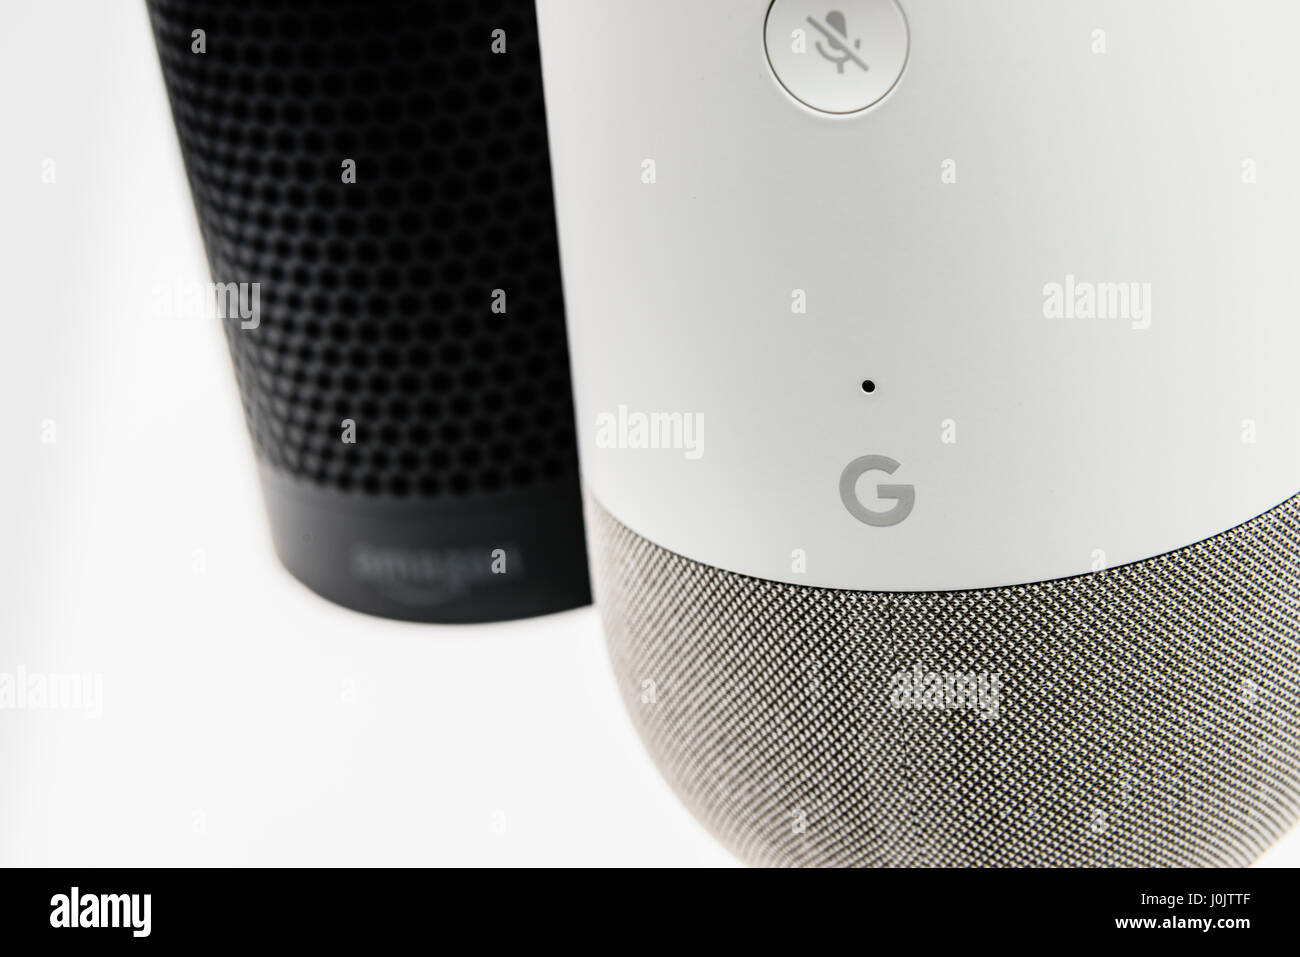 Google Home and Amazon Echo smart speakers.  Both offer voice activated personal assistants, music playing and home automation control. Stock Photo